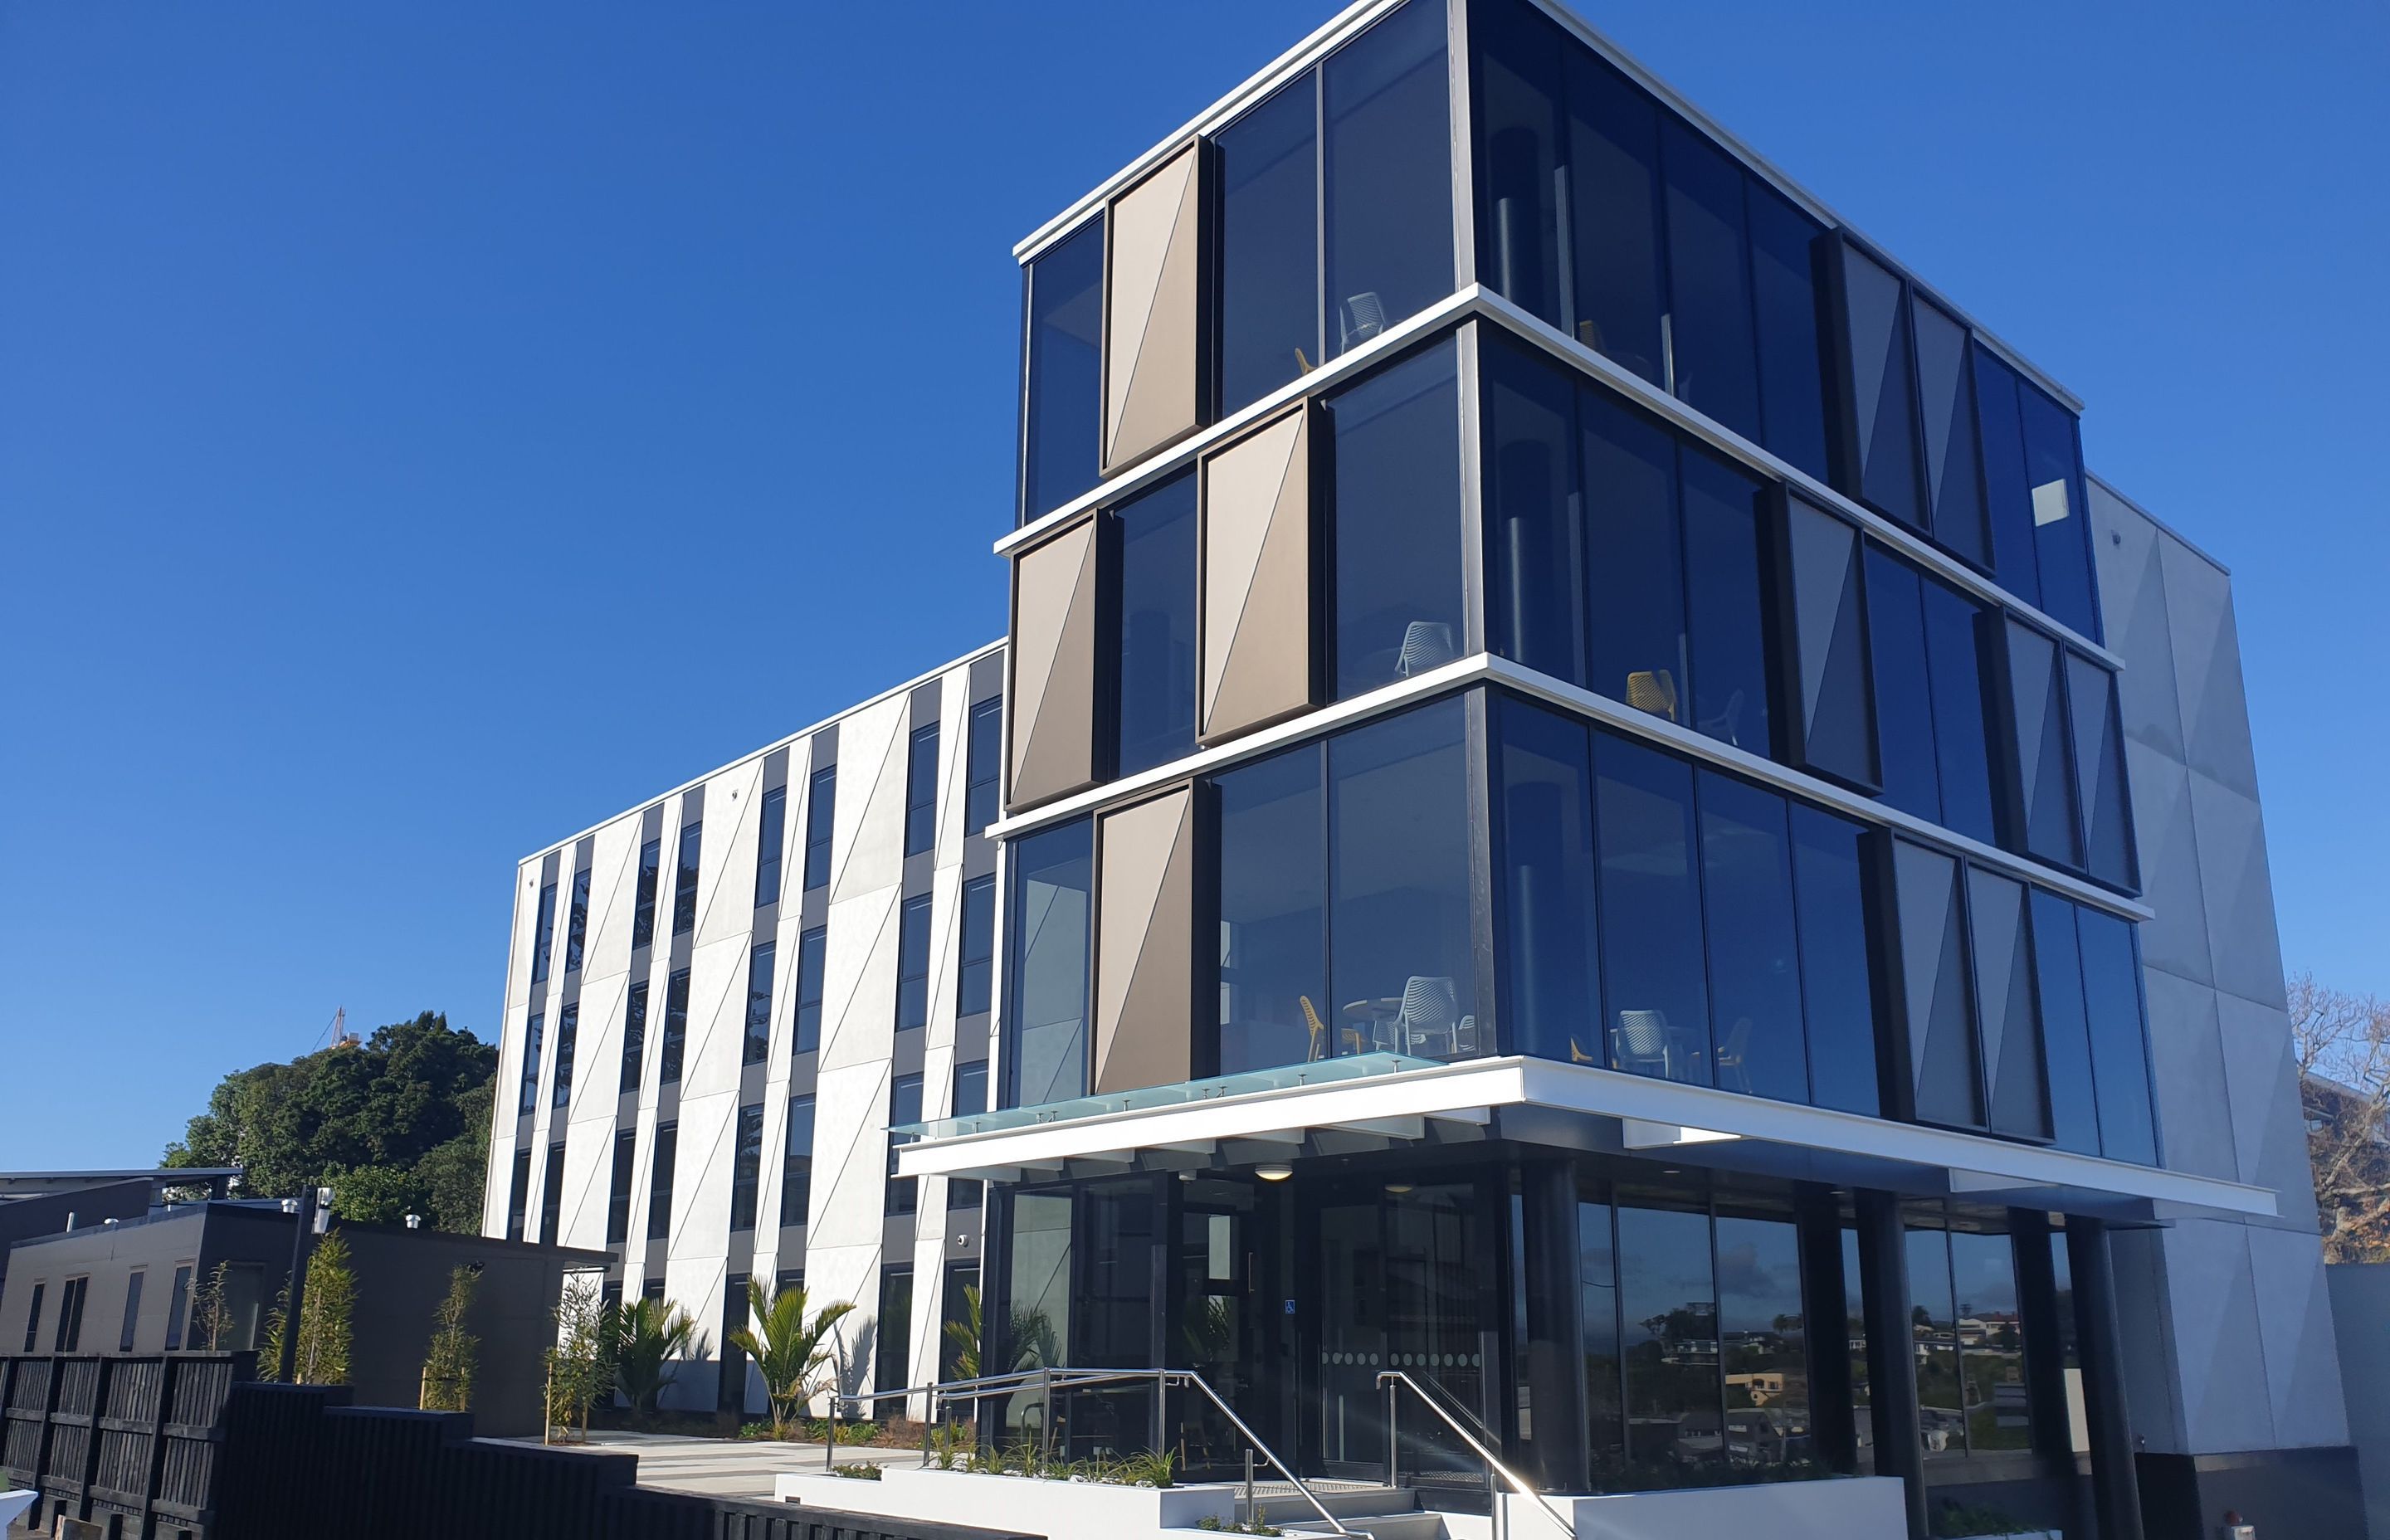  WindowMaster WMX 804-1 Electric chain drives were installed over four levels to work as part of a larger smoke extract system at the University of Waikato's Selwyn Street Student Living building.